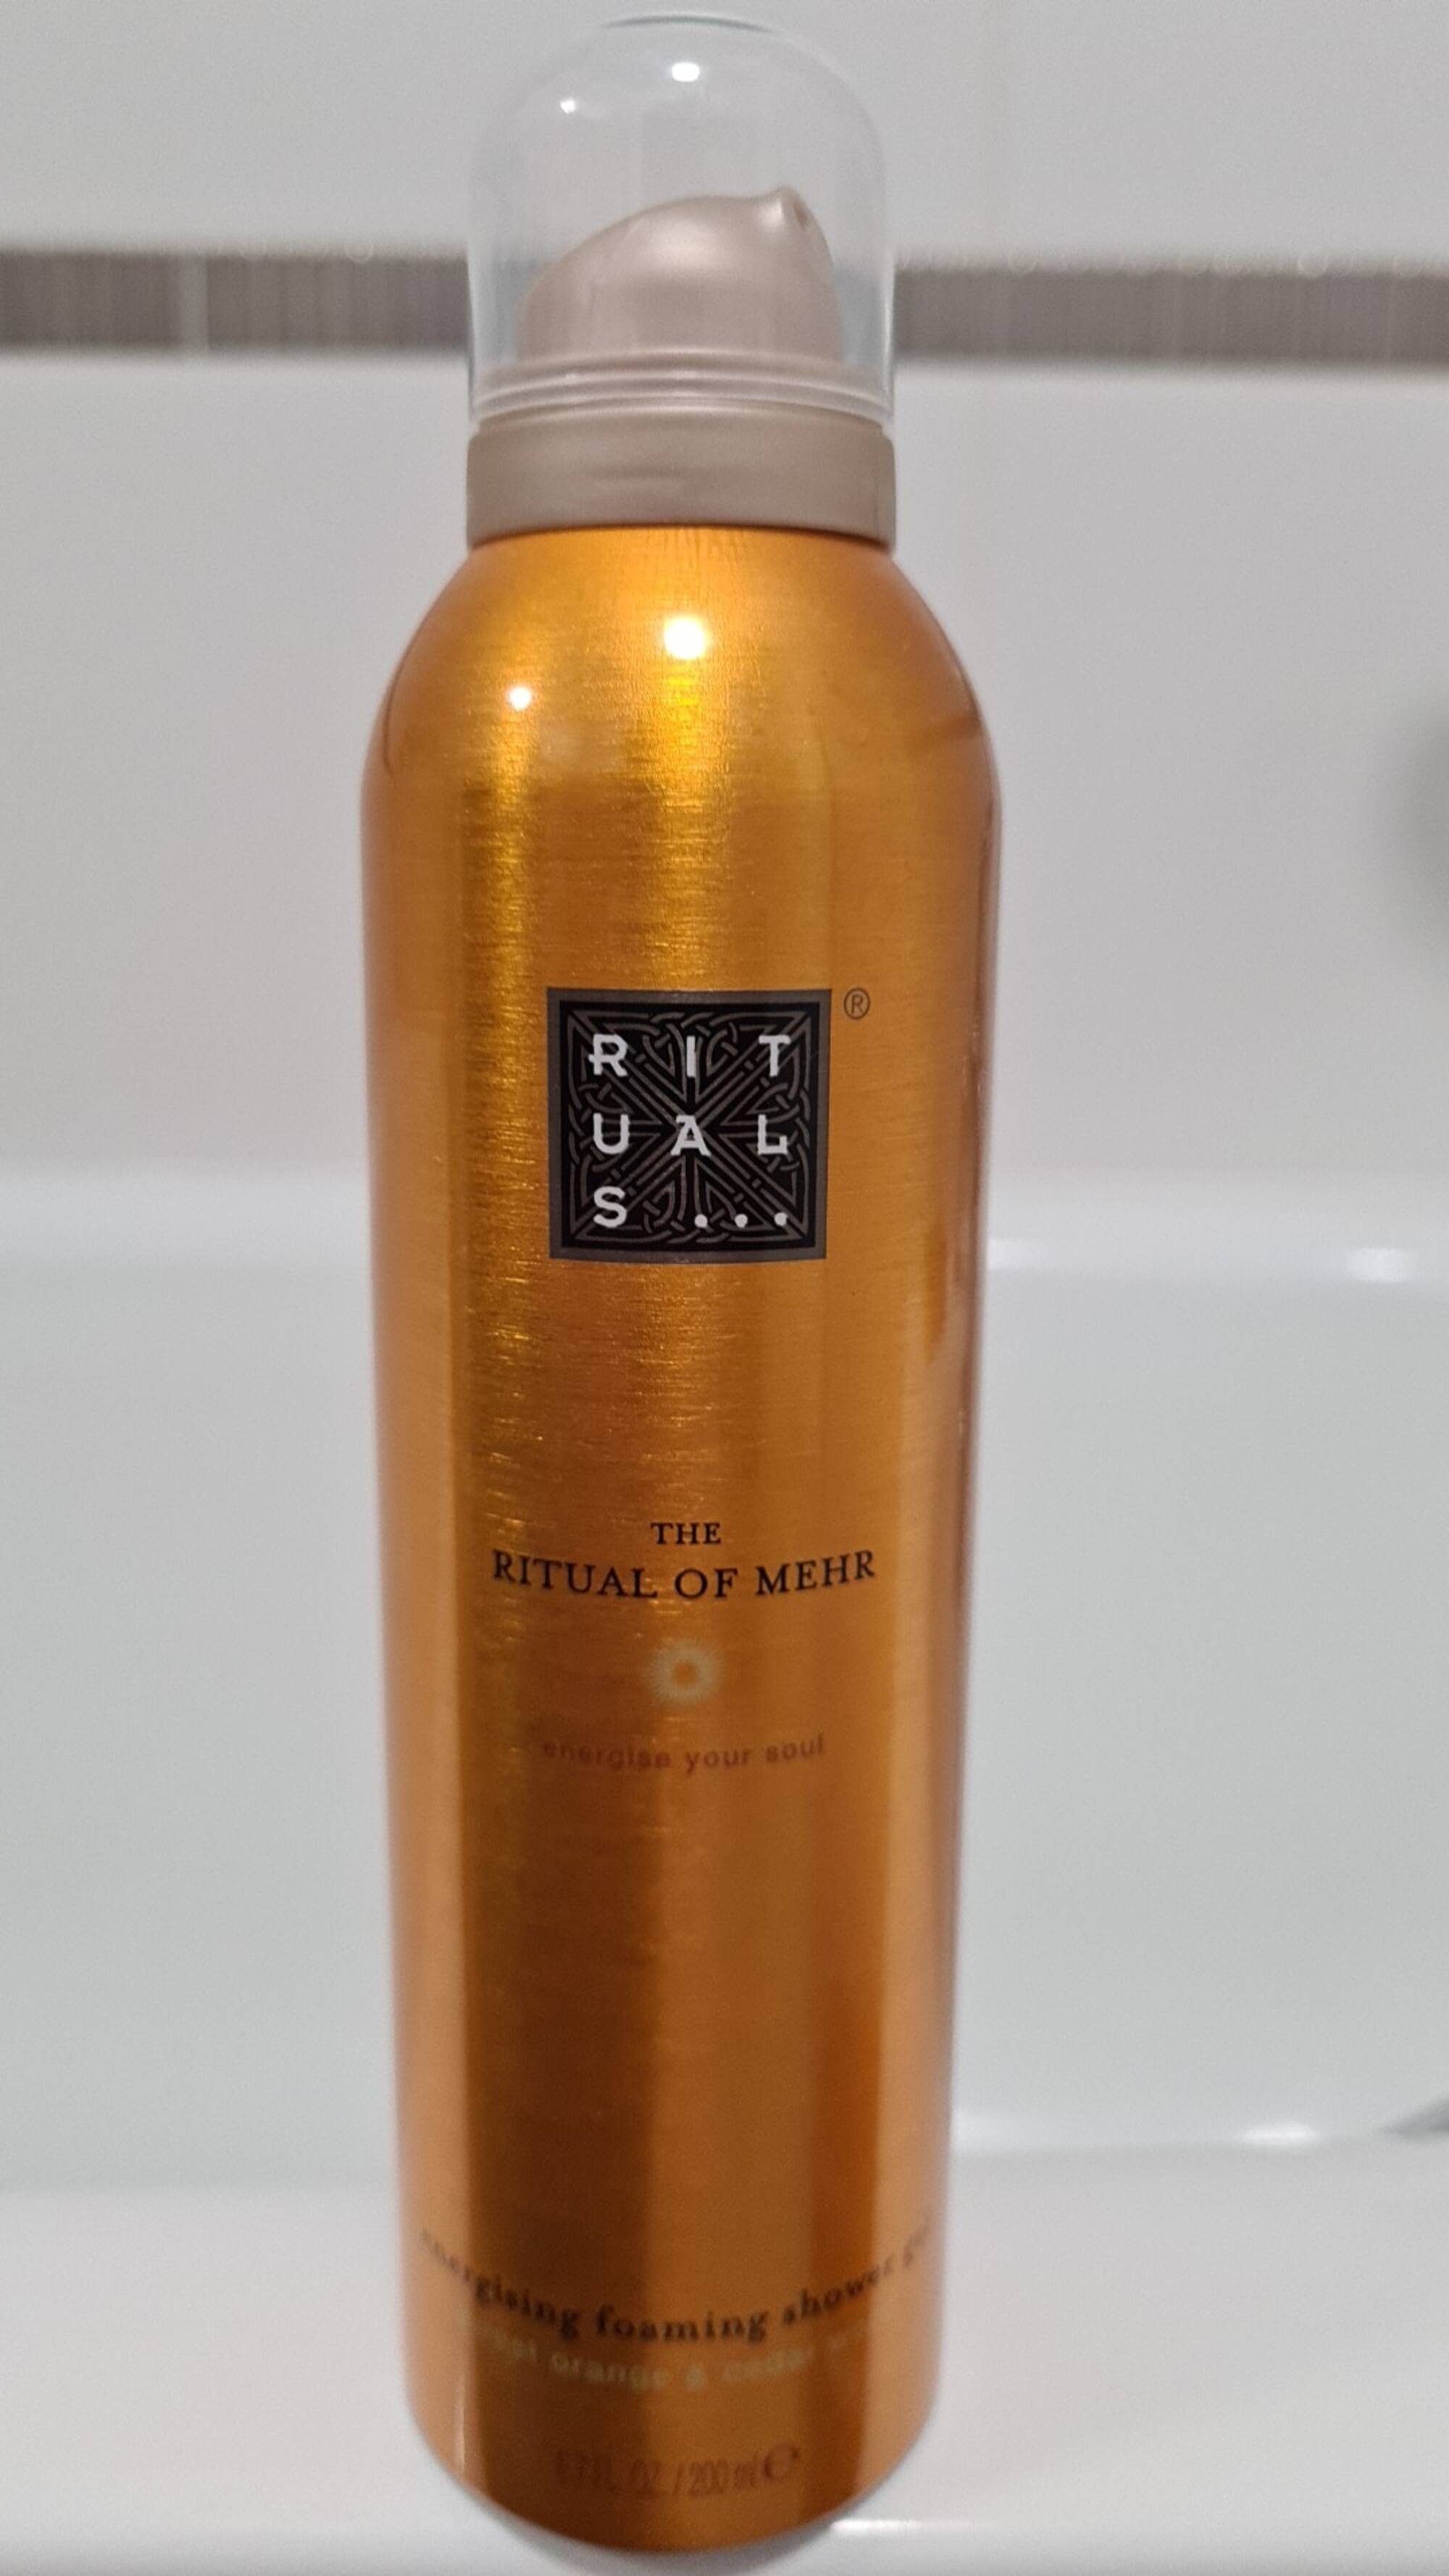 Composition RITUALS The ritual of Mehr - Energisin foaming shower gel -  UFC-Que Choisir